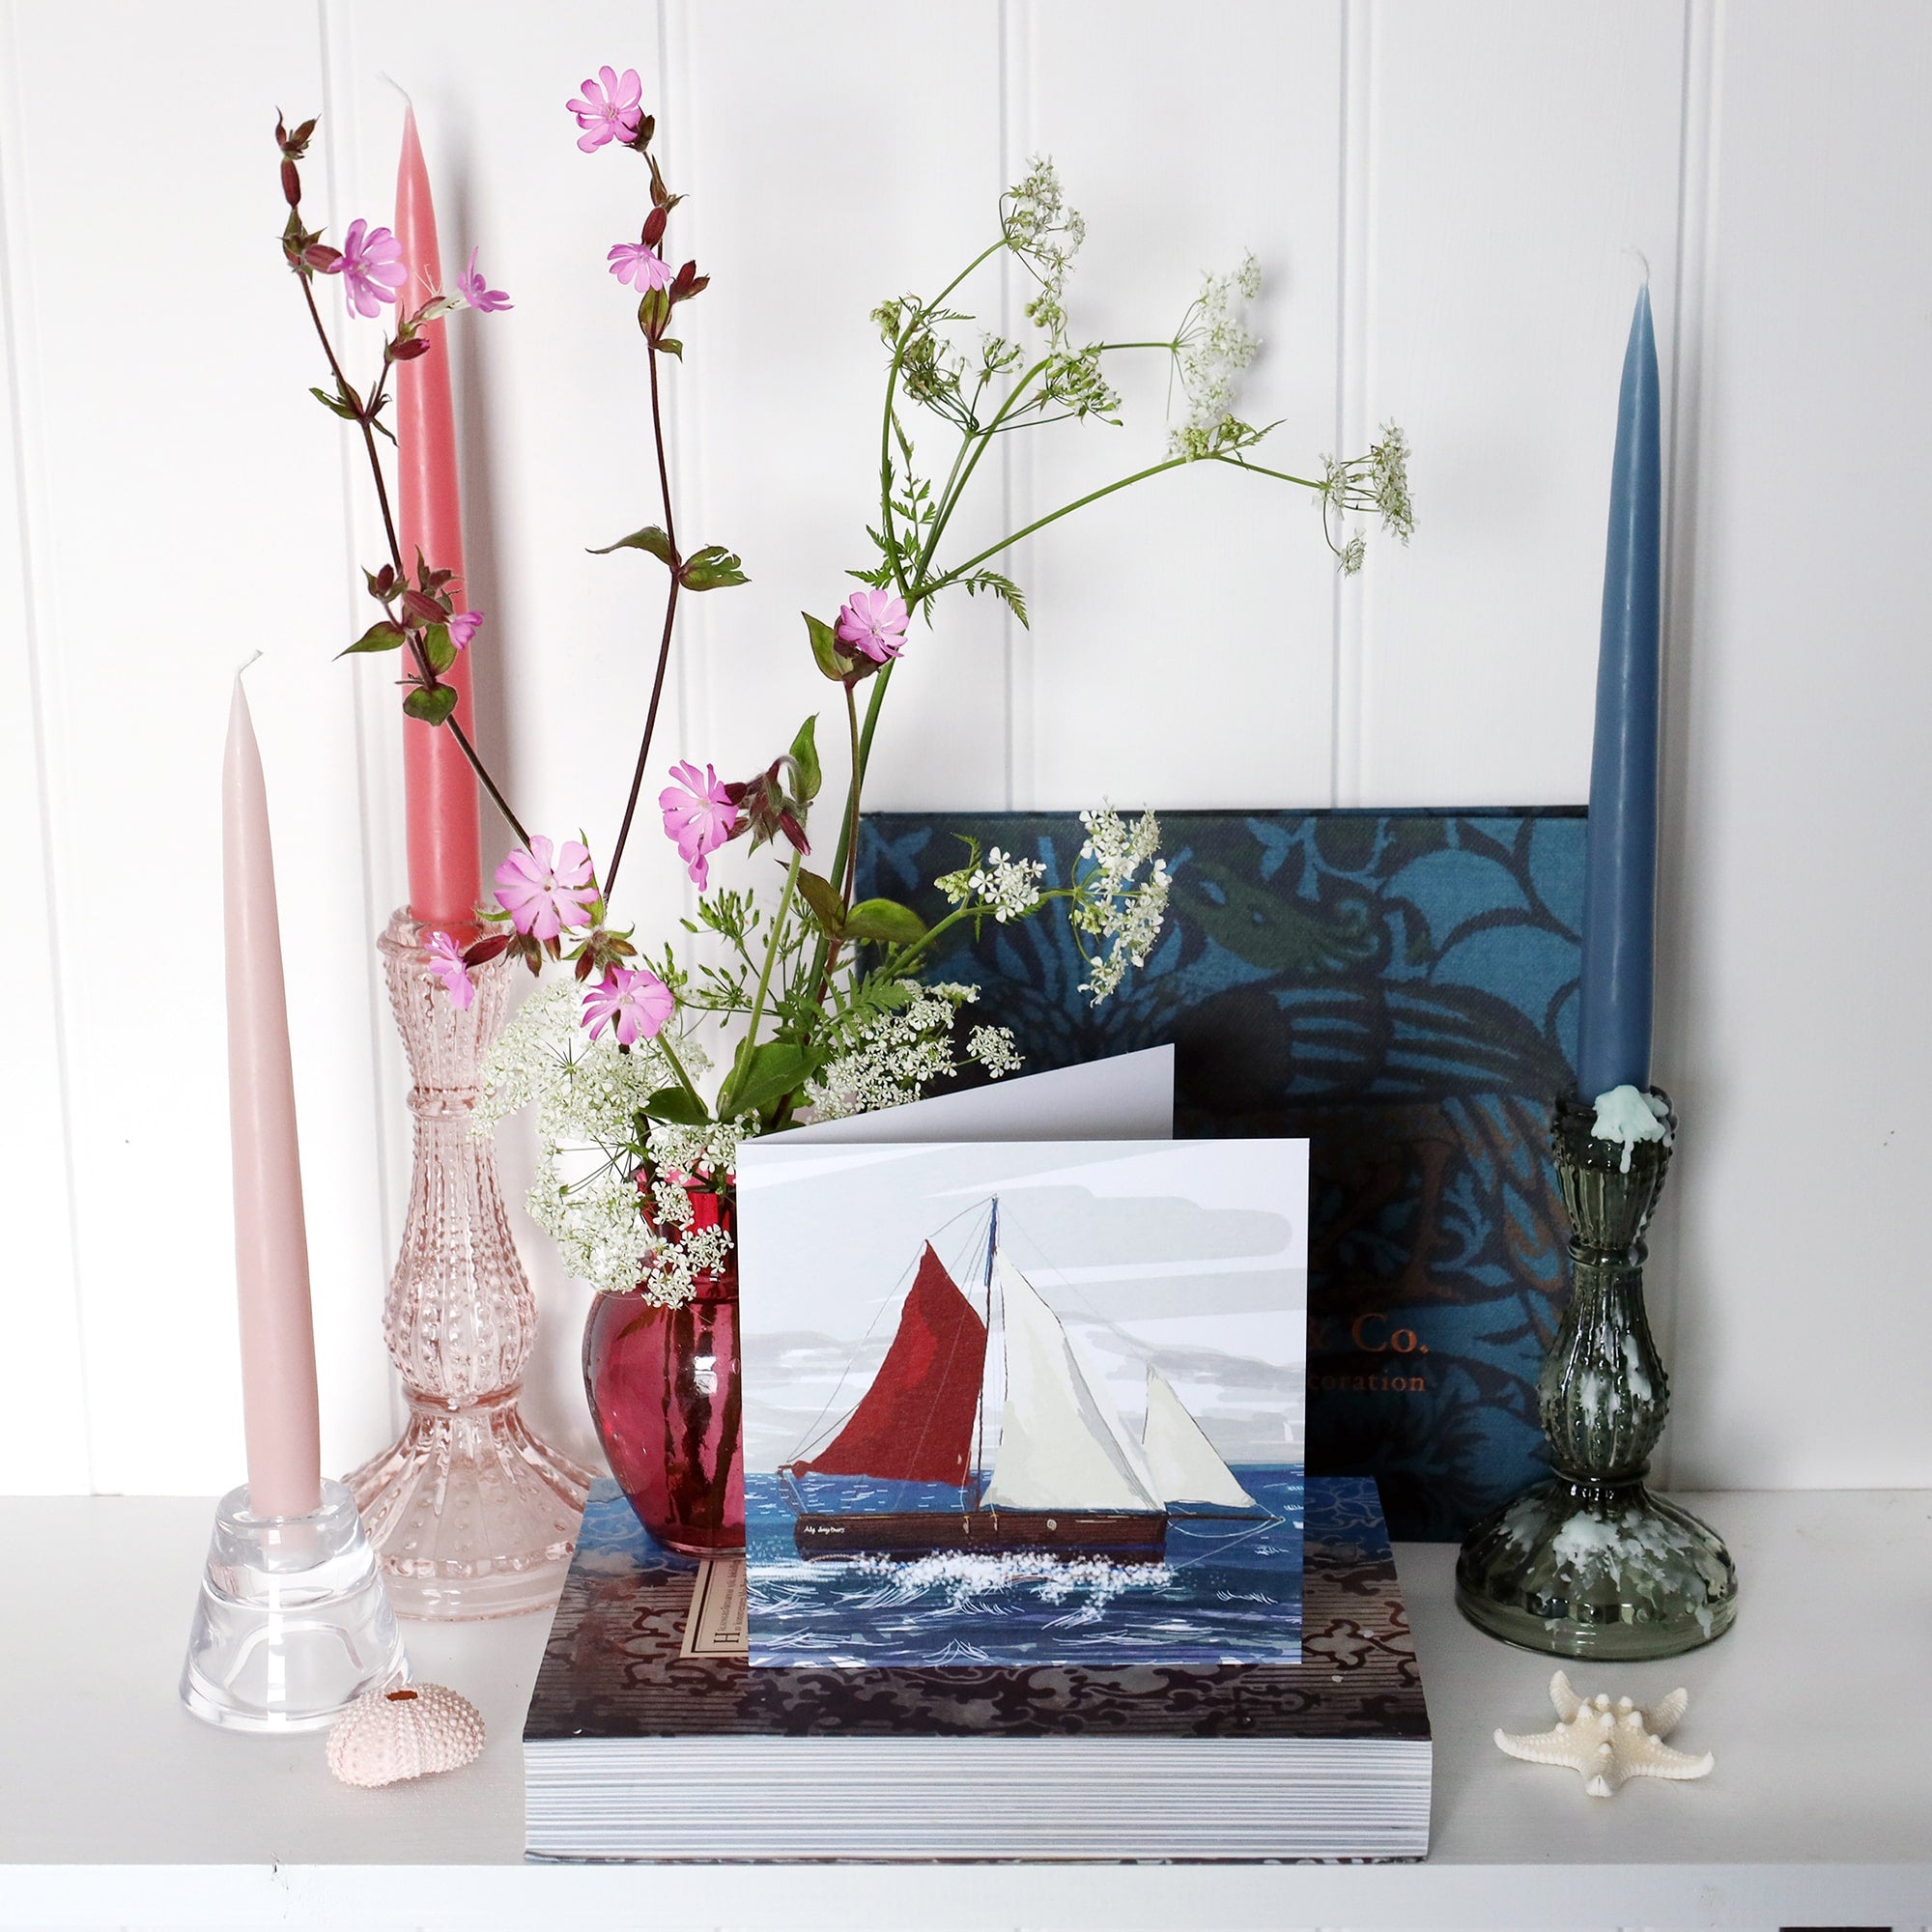 greeting card with illustration of a cornish crabber boat sailing in the sea on shelf with pink and blue candles in candlesticks and a small cranberry glass jug with wild flowers in